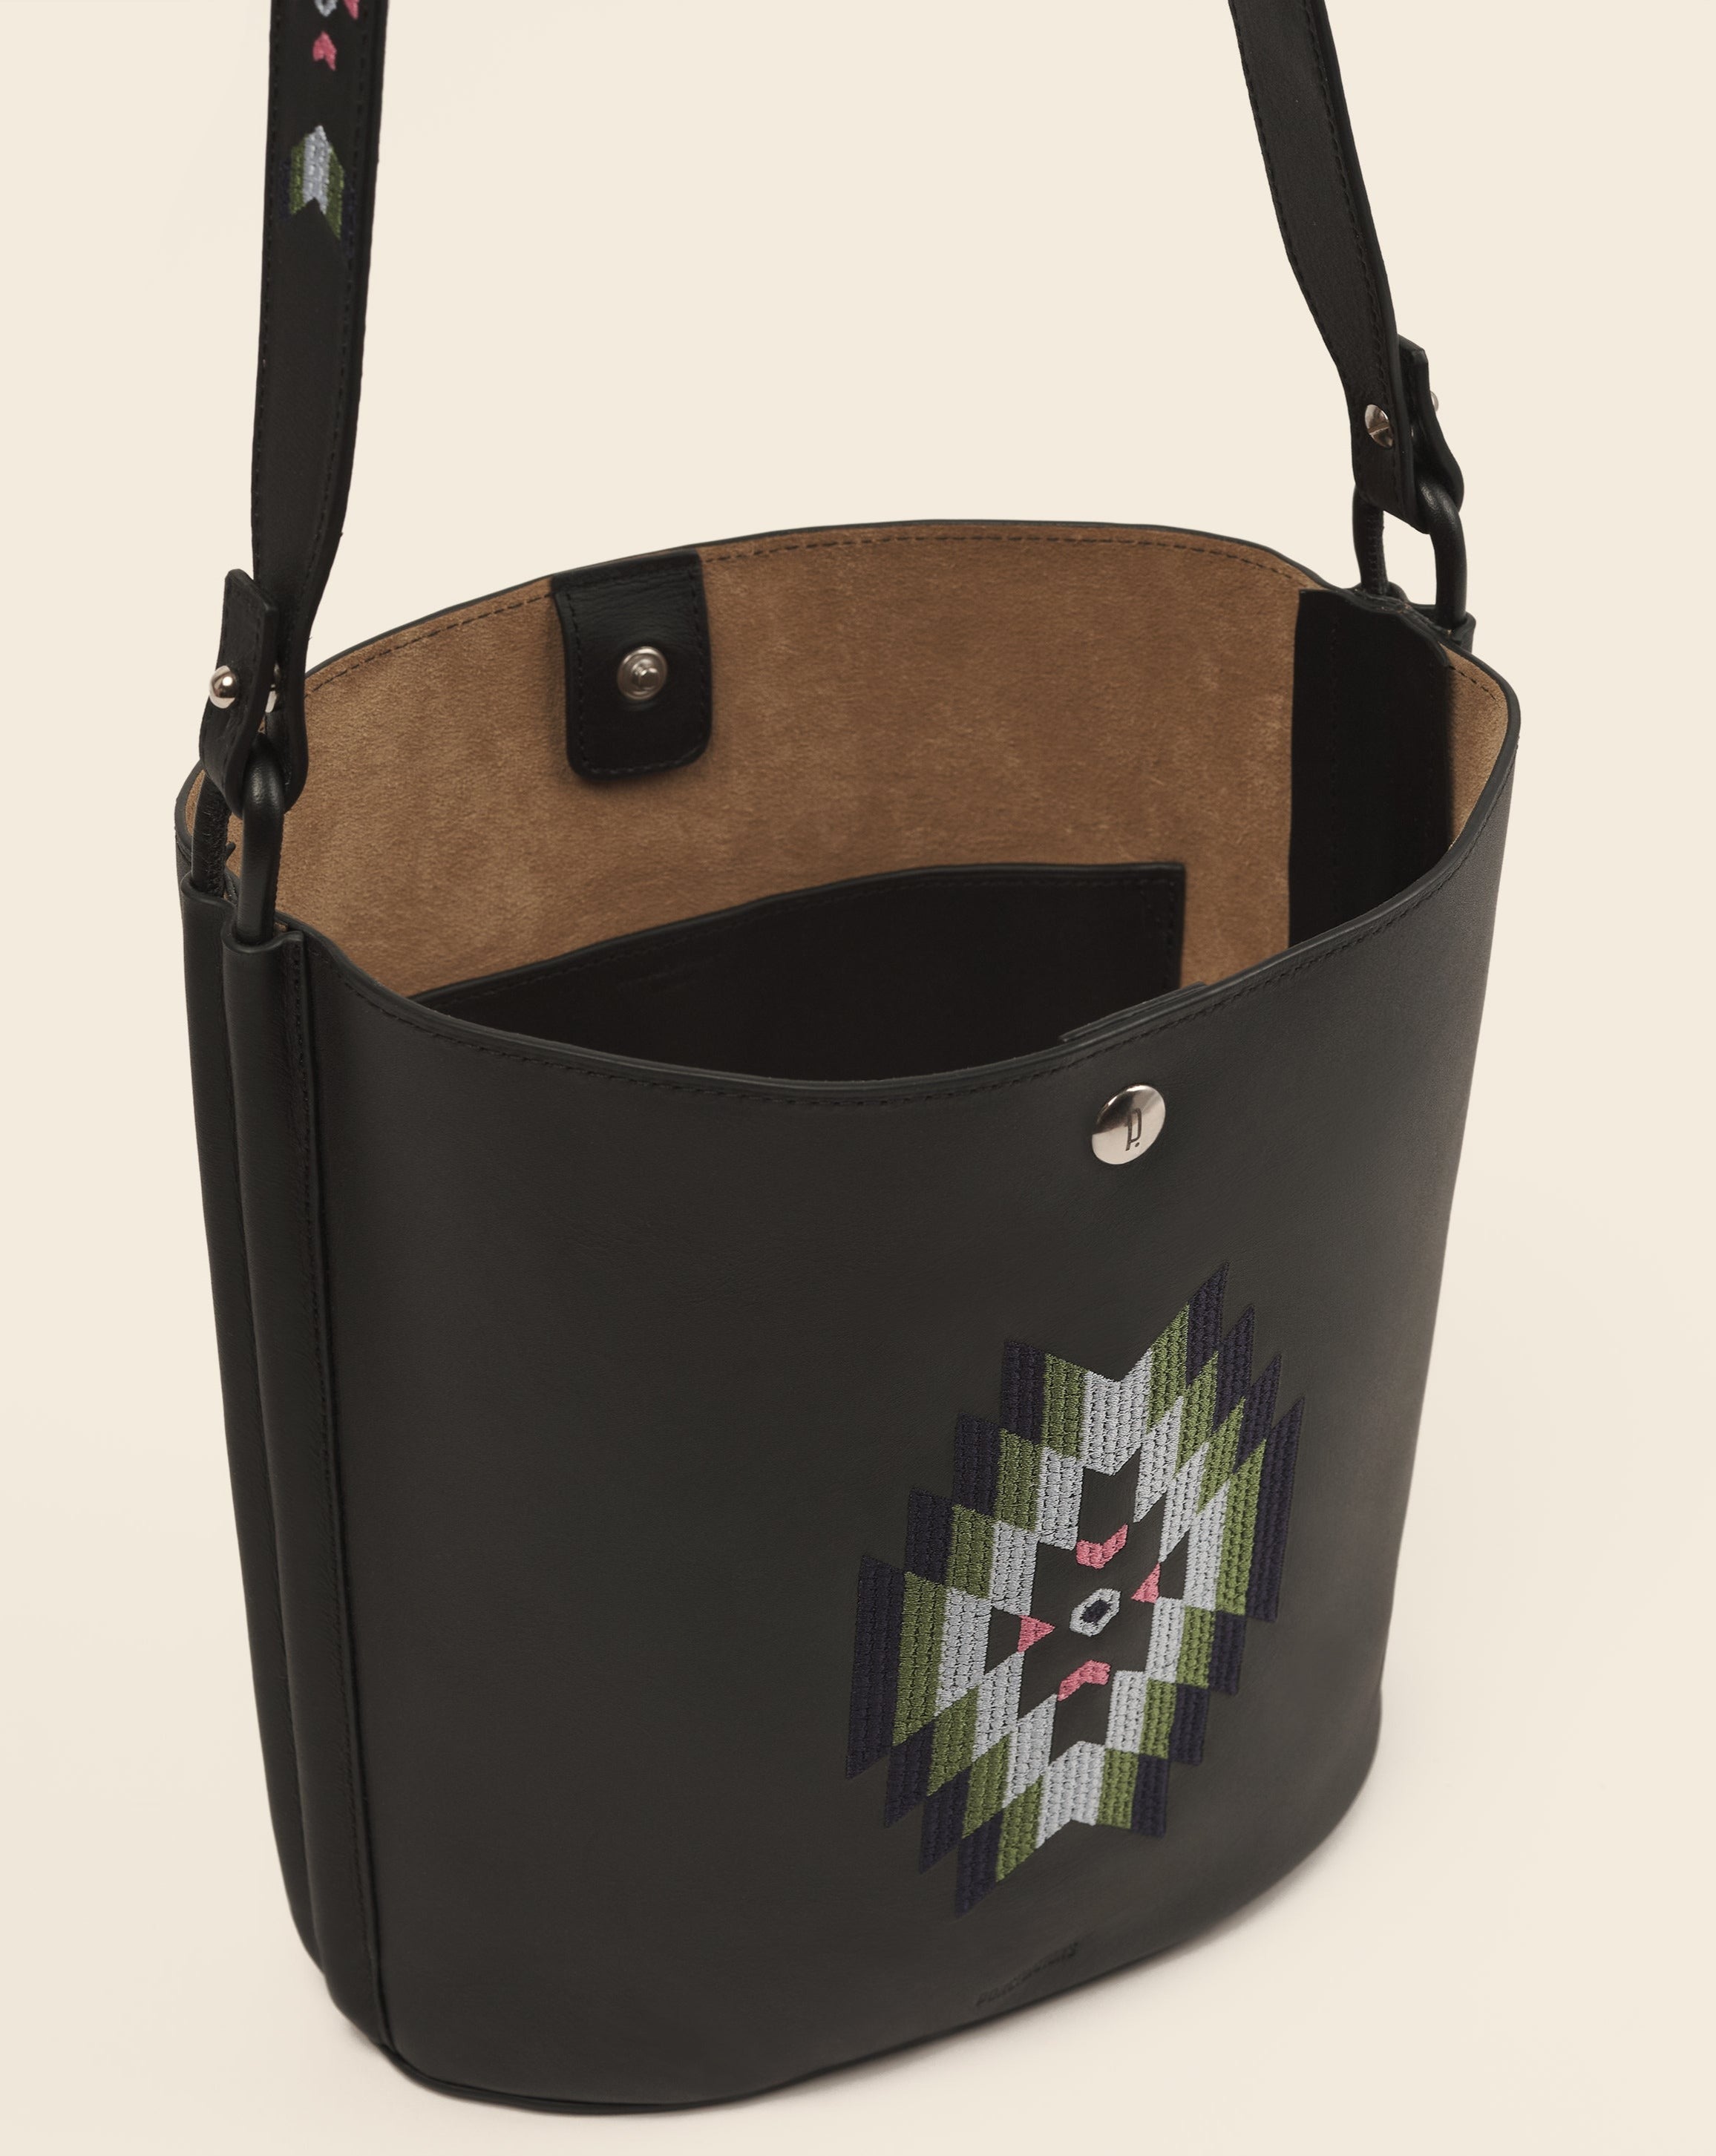 IOWA - Leather bucket bag - Black leather & multicolored embroidery